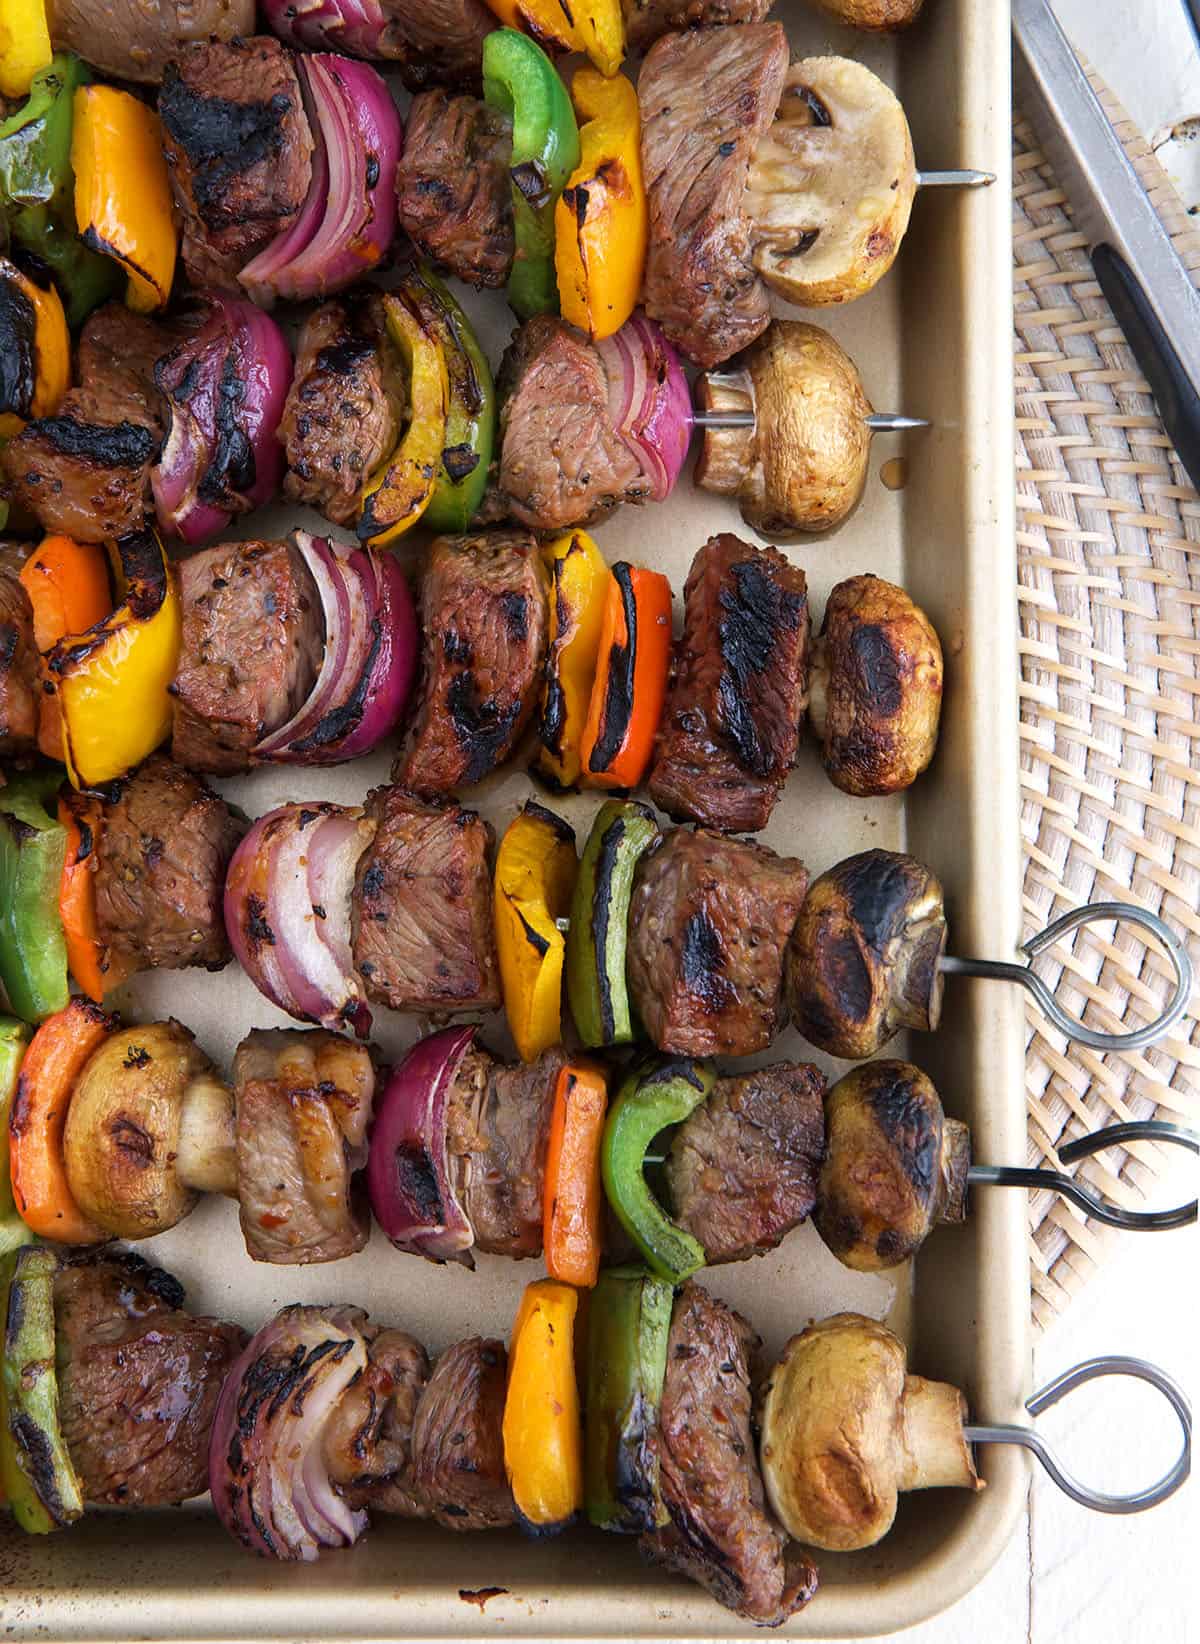 Steak shish kabobs are lined up on a large rimmed baking sheet.